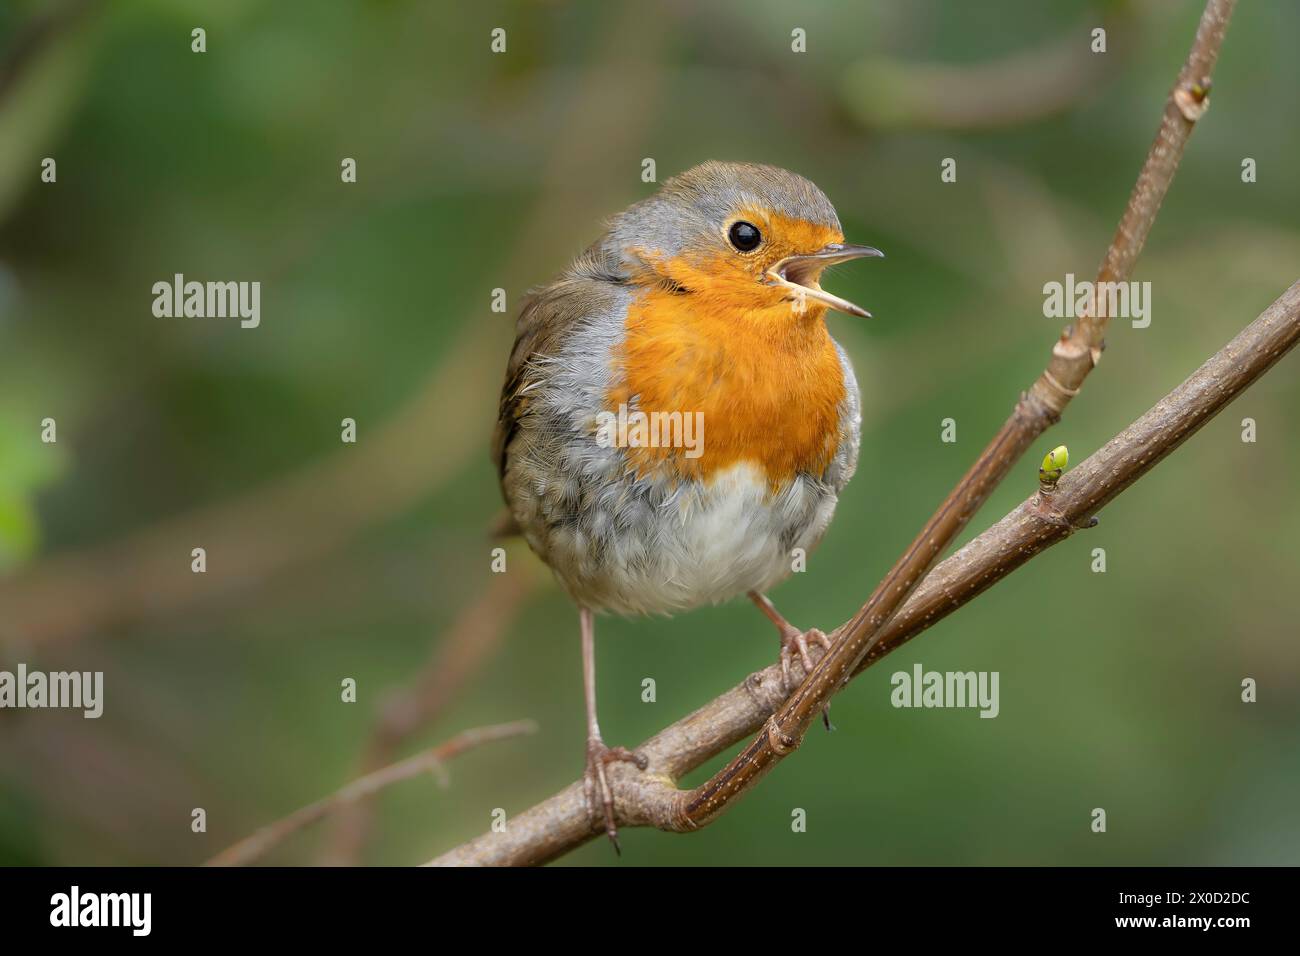 Detailed close up of a wild, UK robin bird (Erithacus rubecula) isolated on a branch, singing with beak open wide. Stock Photo